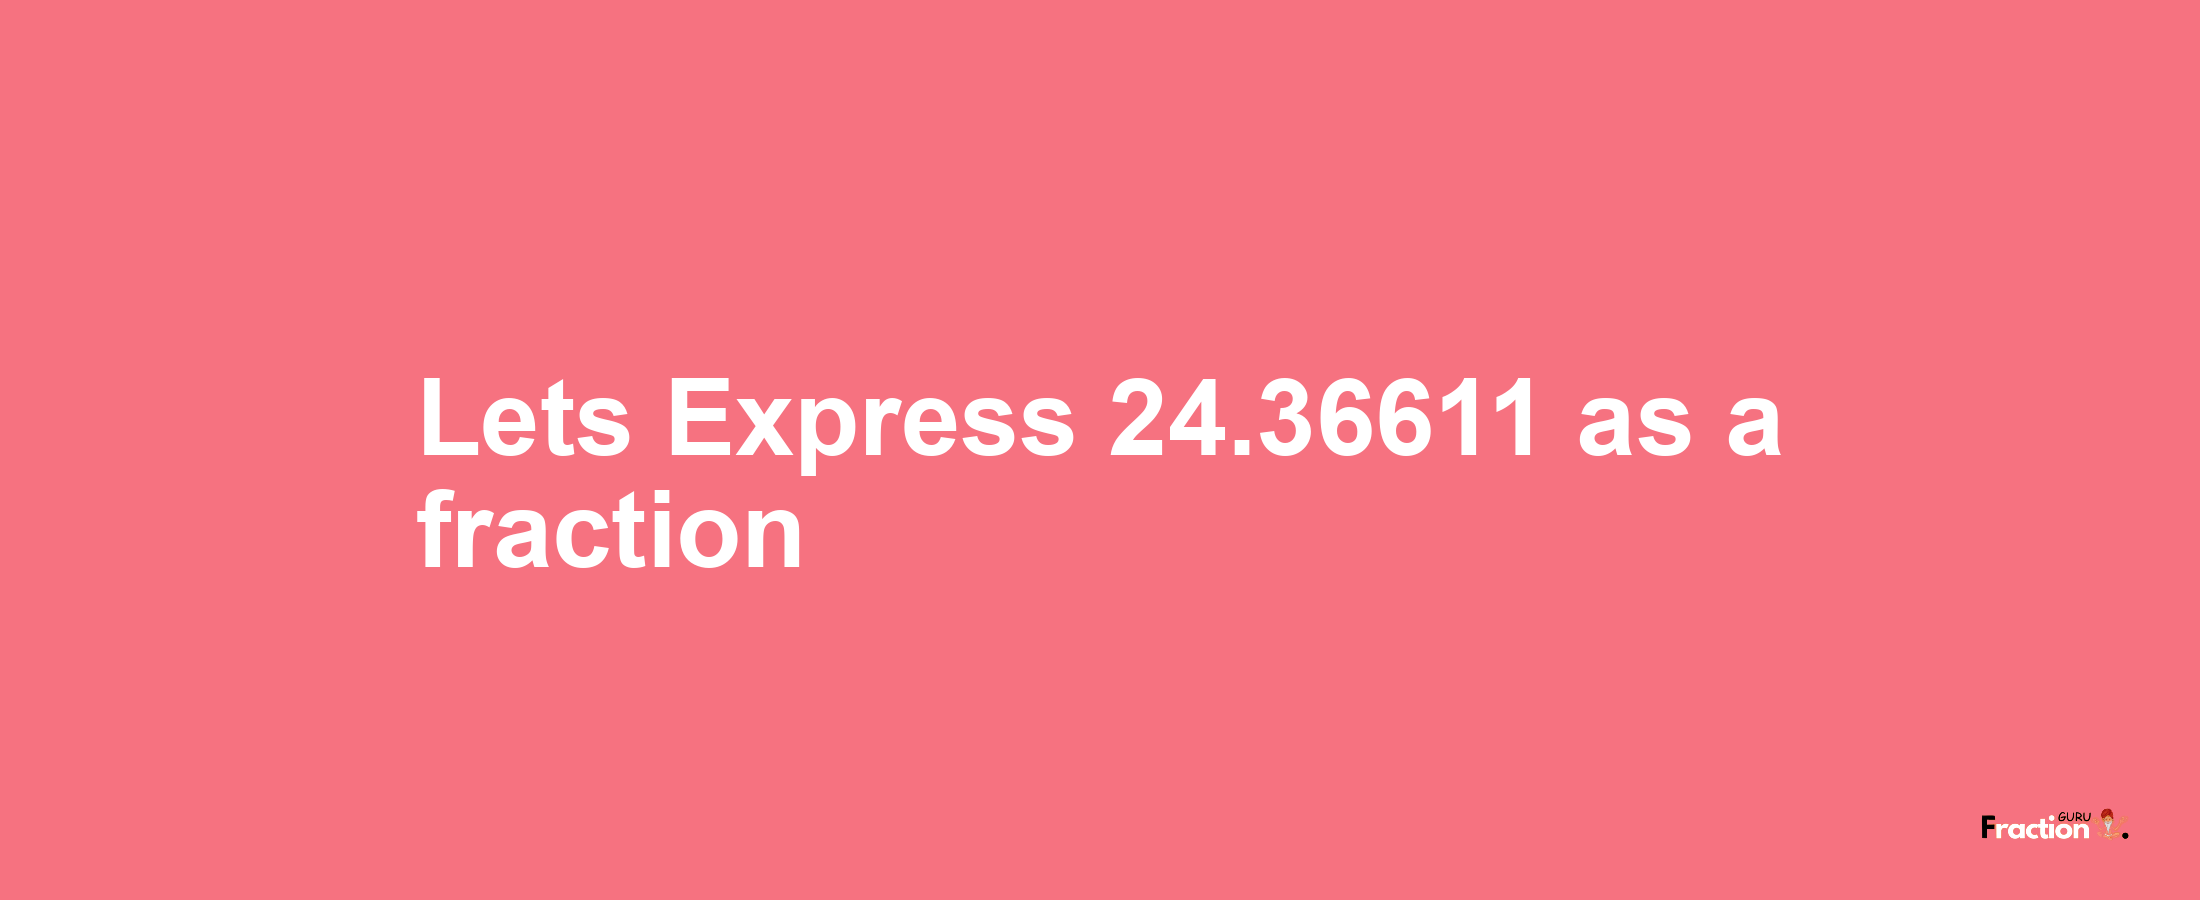 Lets Express 24.36611 as afraction